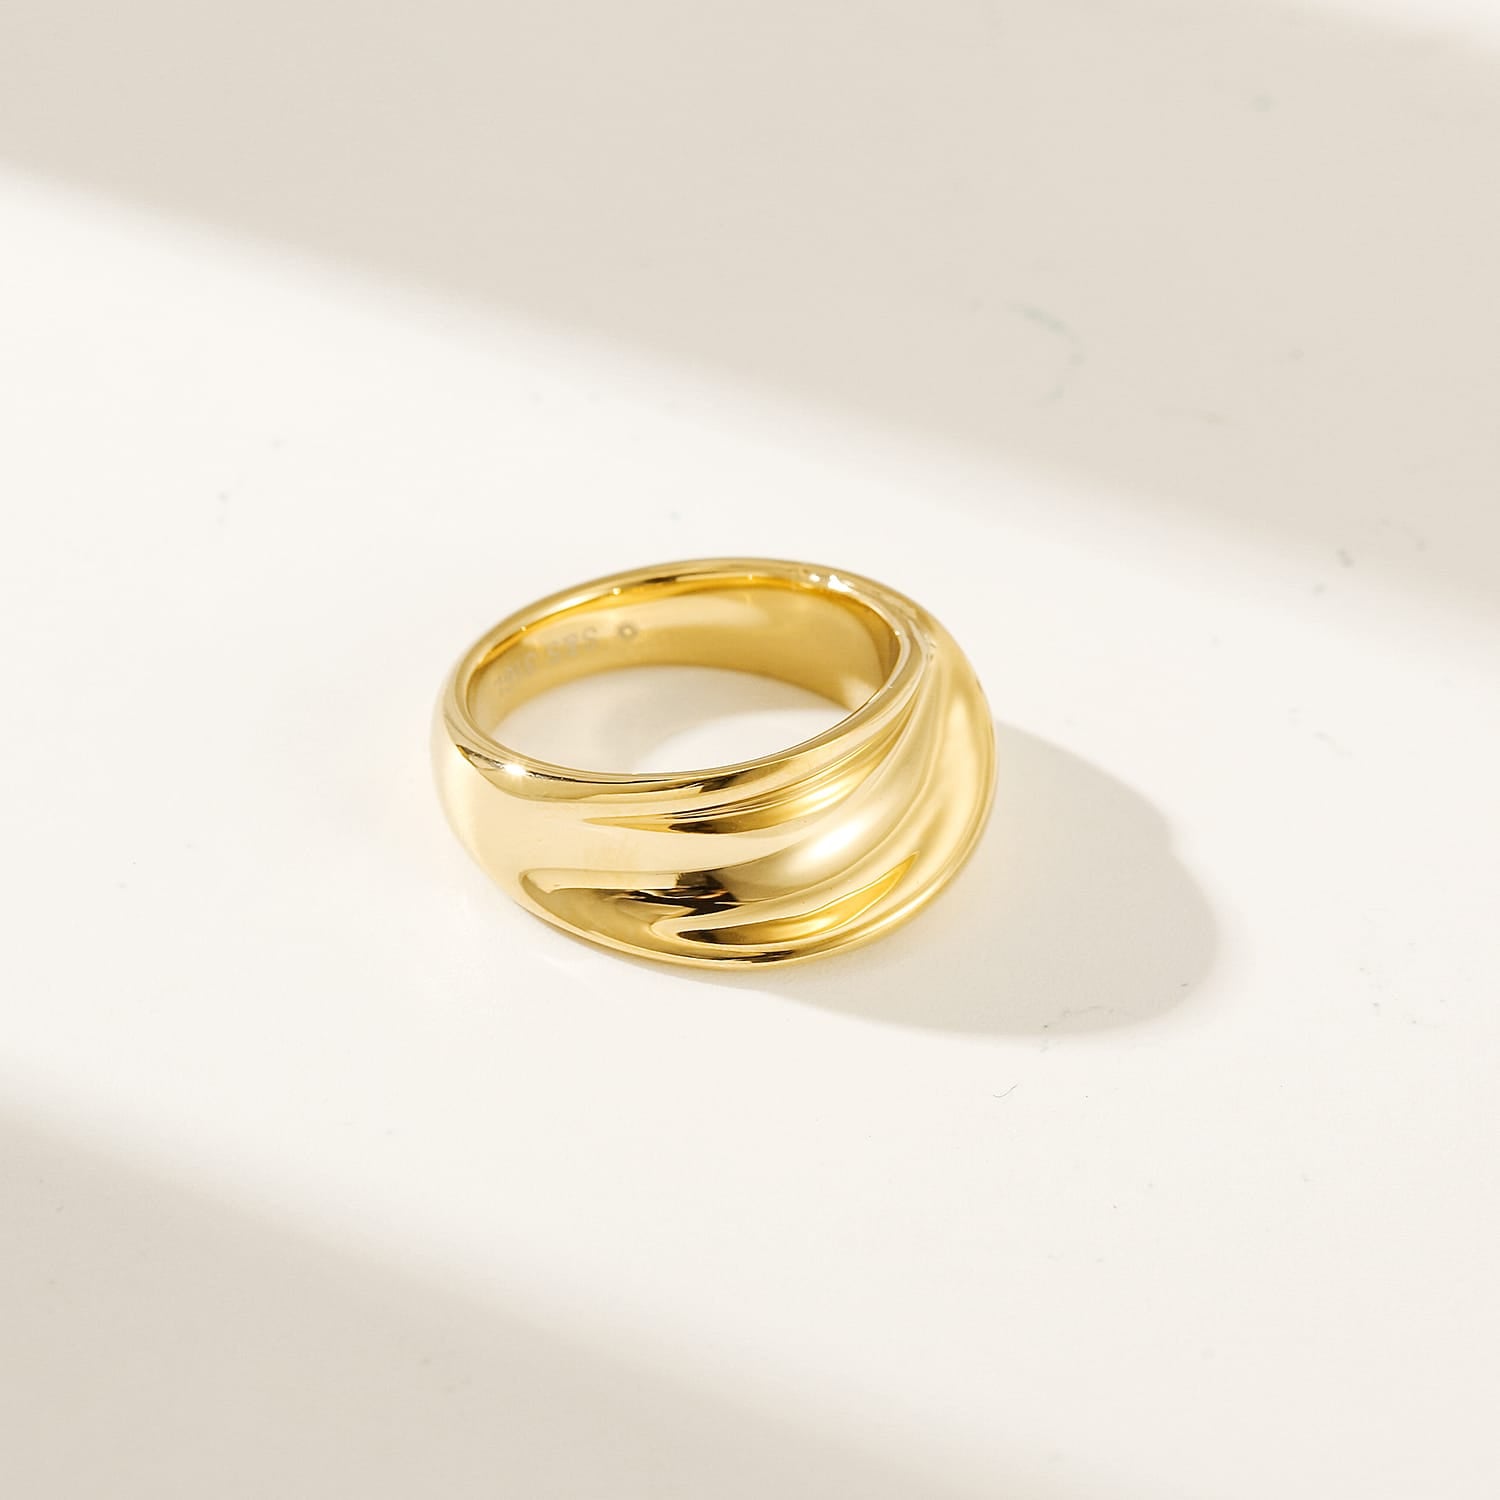 New Design Curved Ring